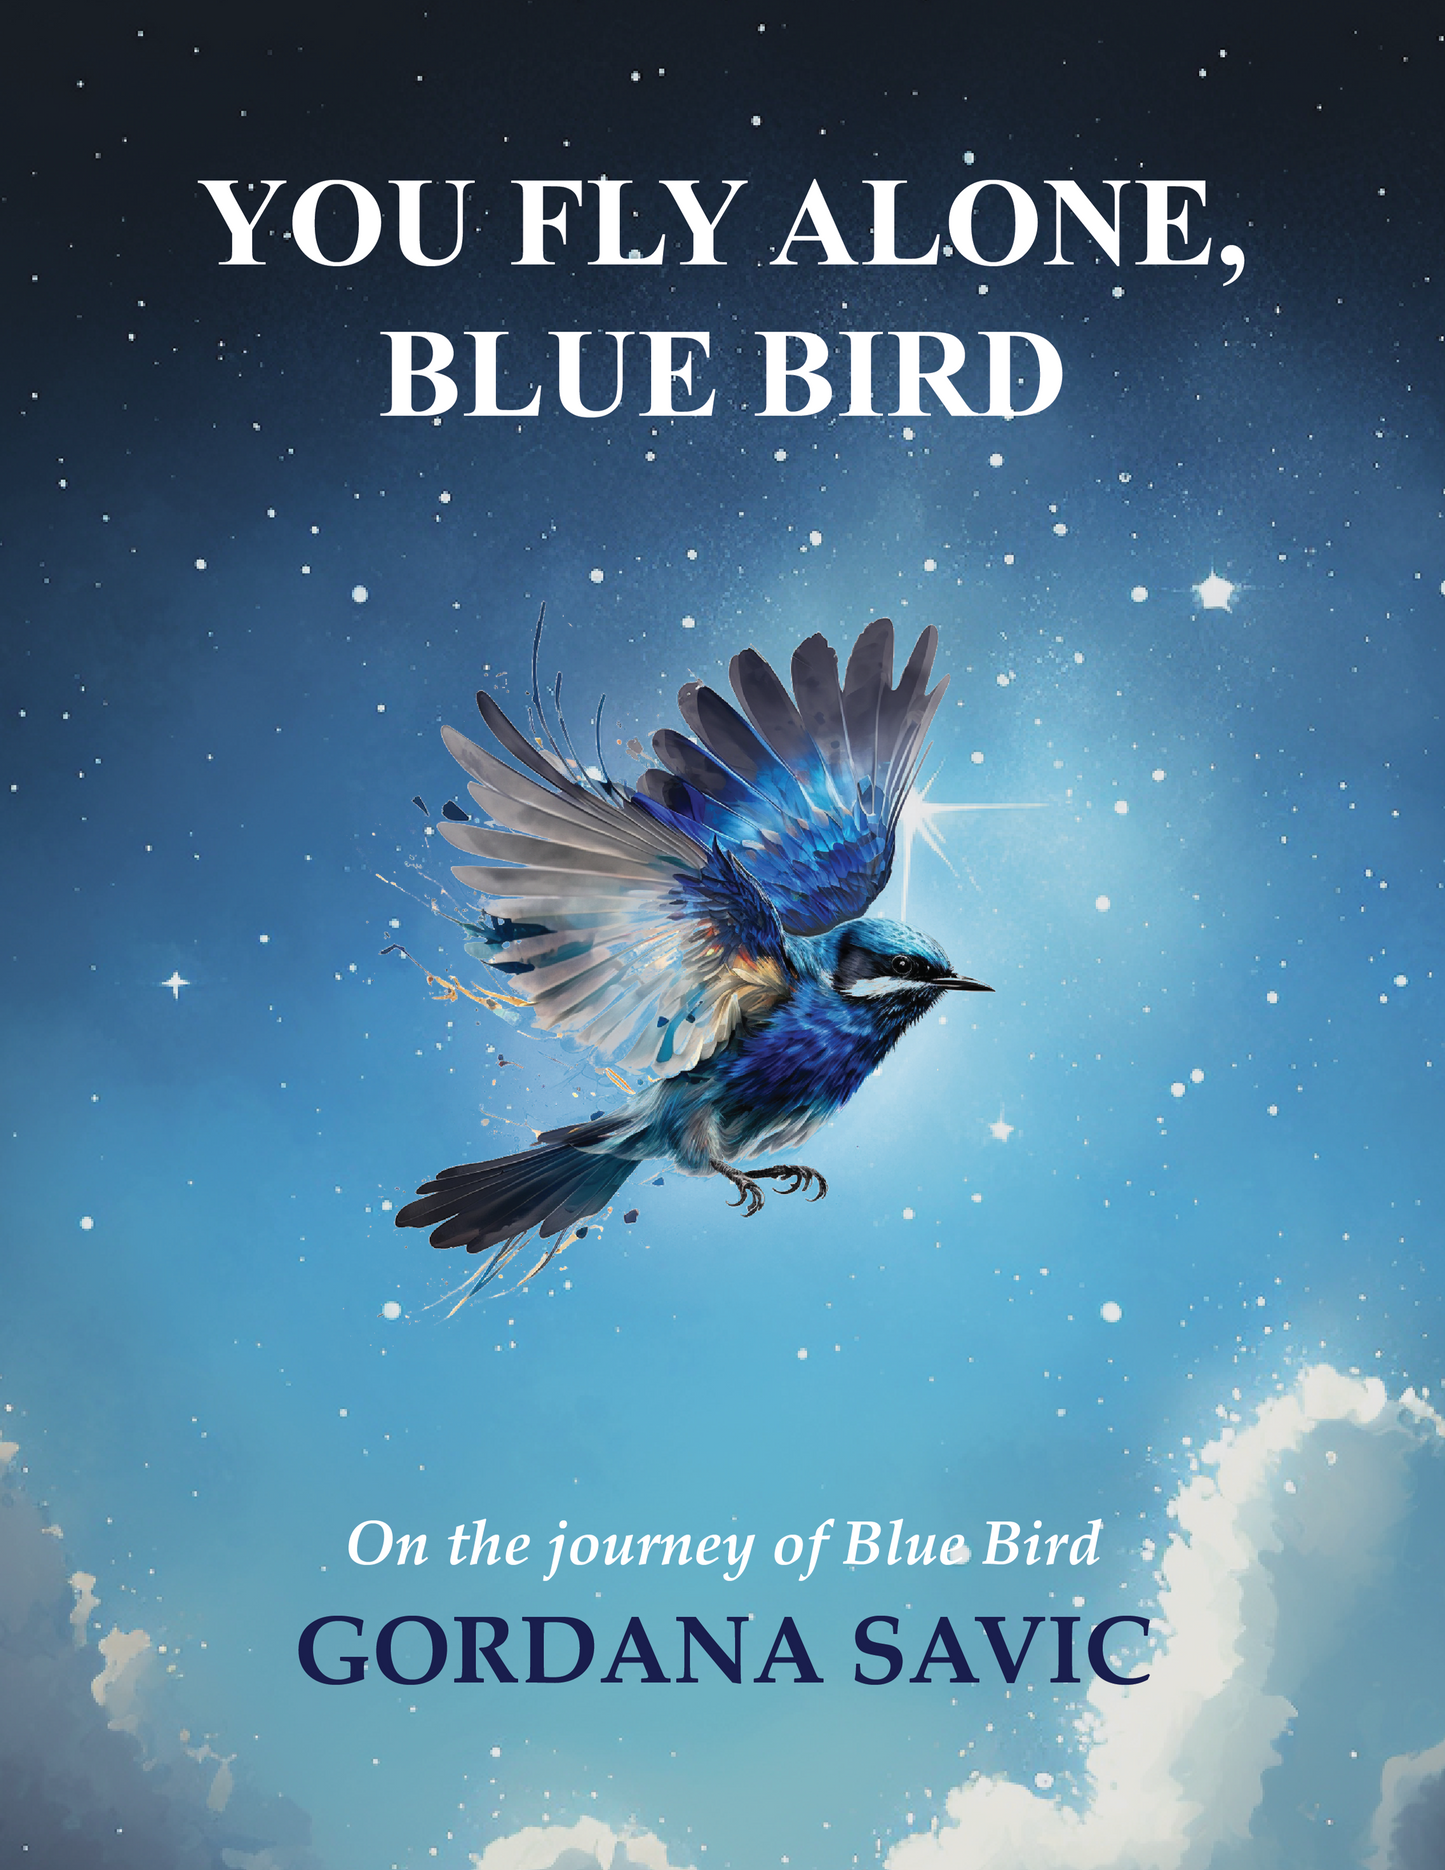 book, non fiction, self-reflection, thought-provoking, life choices, self-awareness, You fly alone, blue bird, on the journey of blue bird, Gordana Savic